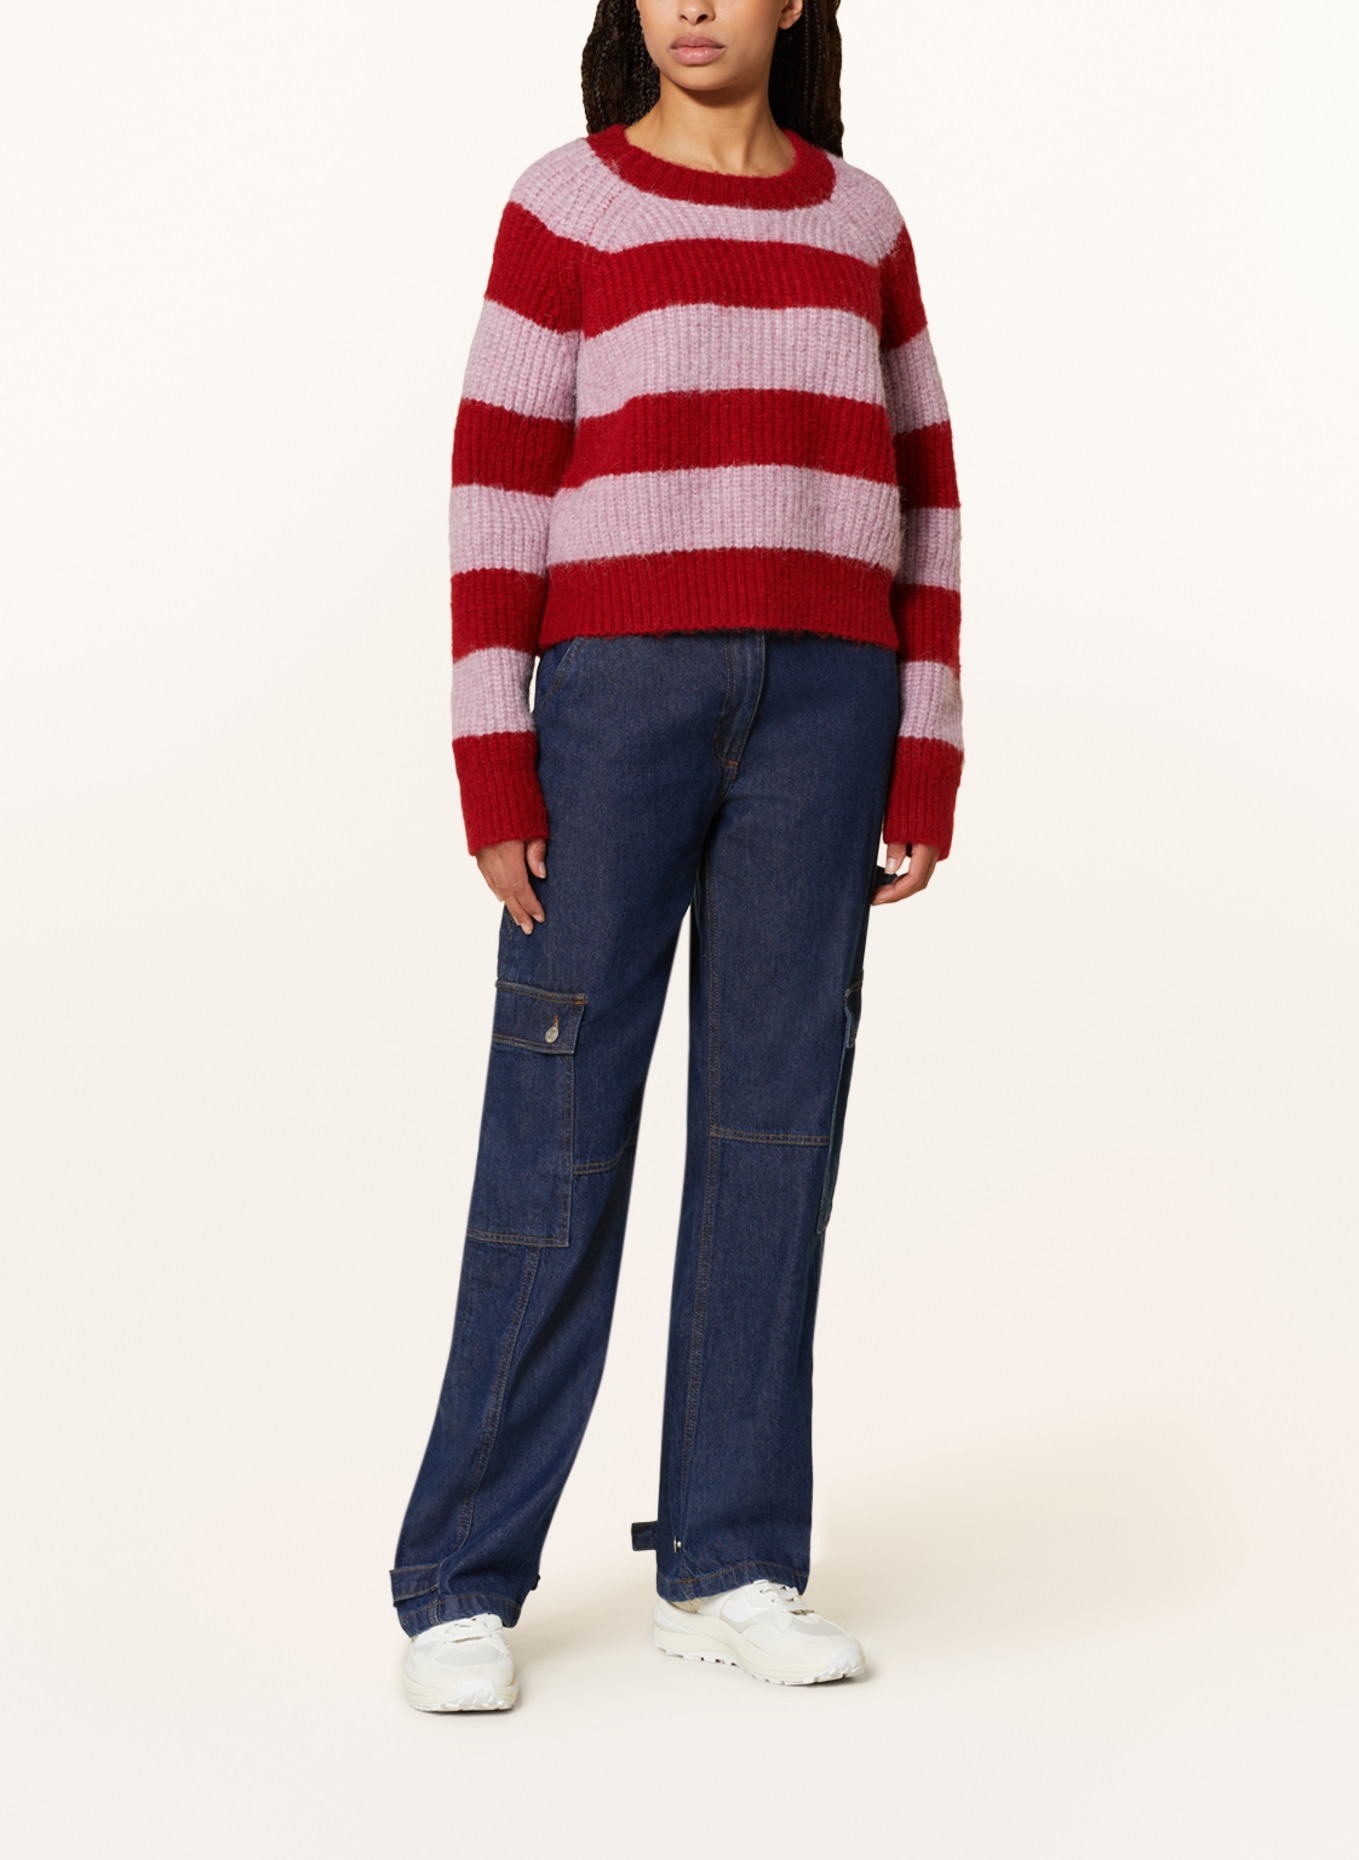 COLOURFUL REBEL Sweater, Color: DARK RED/ PINK (Image 2)